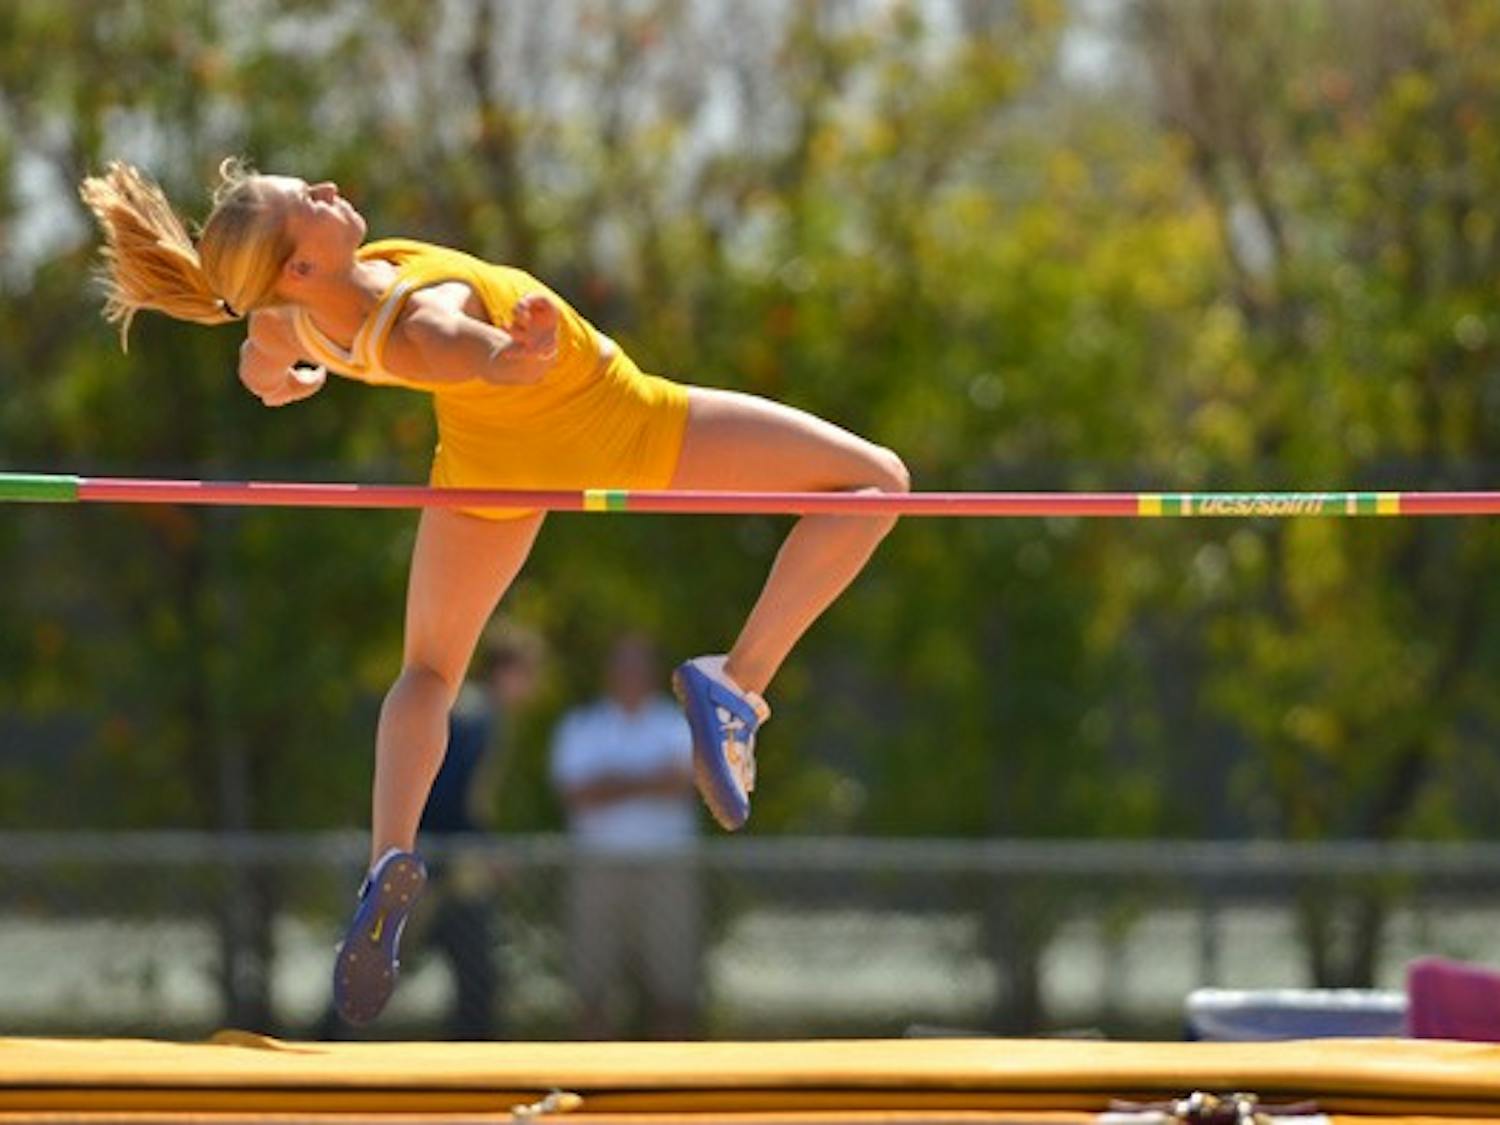 More Travels: ASU senior Samantha Henderson flops over the high bar at the ASU Invite in Tempe on March 26. The Sun Devils travel to the Mt. SAC Relays in Walnut, Calif. on Thursday for the team’s only meet outside Arizona besides the championship season. (Photo by Aaron Lavinsky)